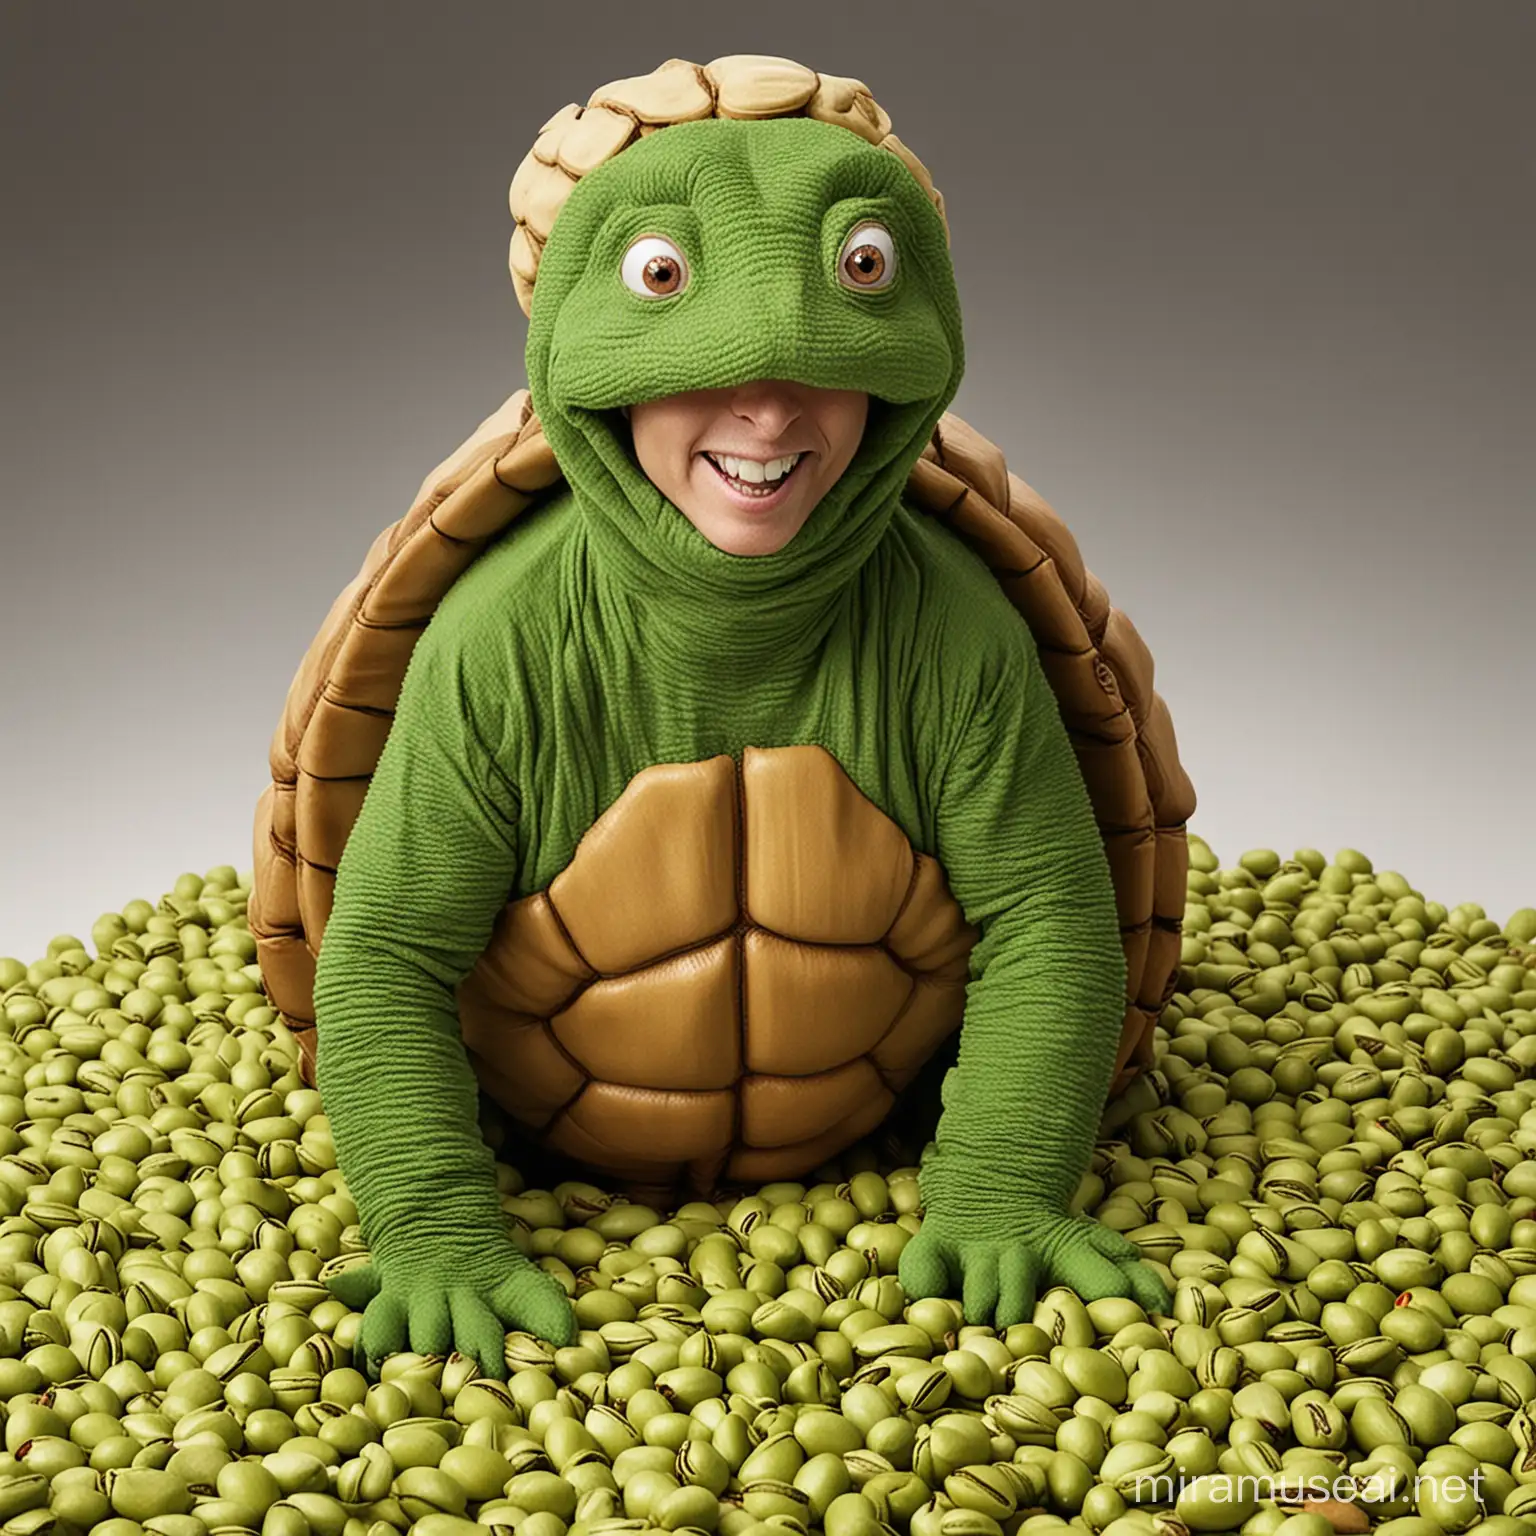 Dana Carvey in Turtle Costume with Pistachios